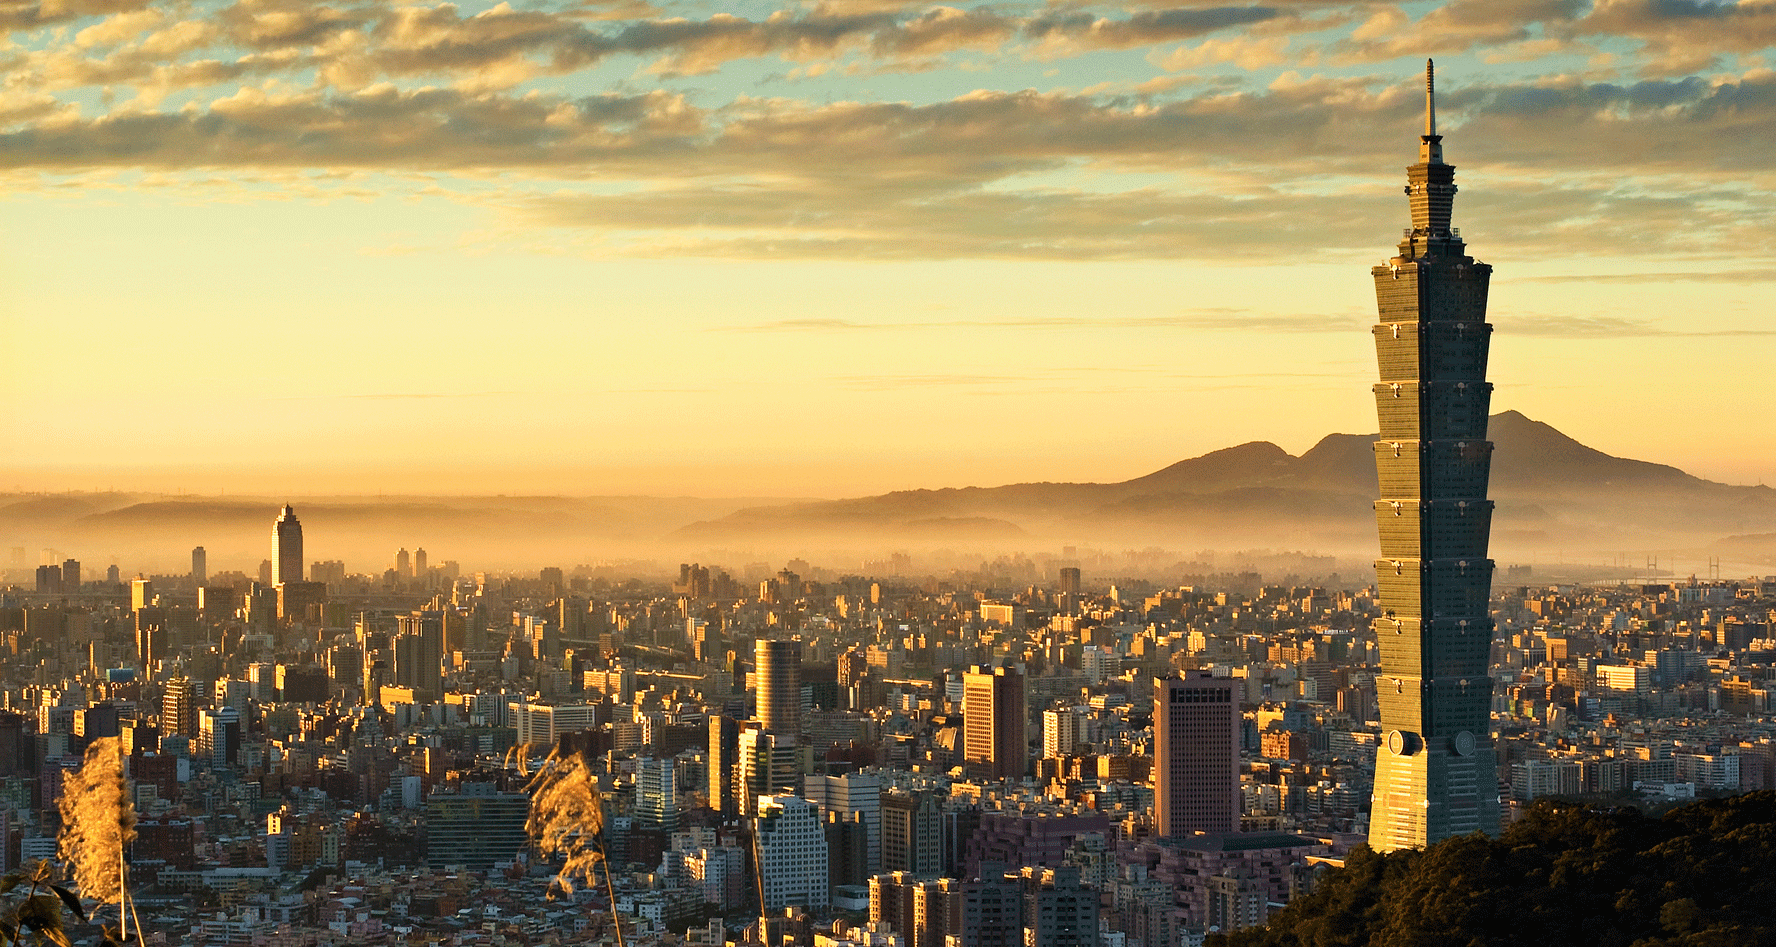 Taiwan skyline background for consulting